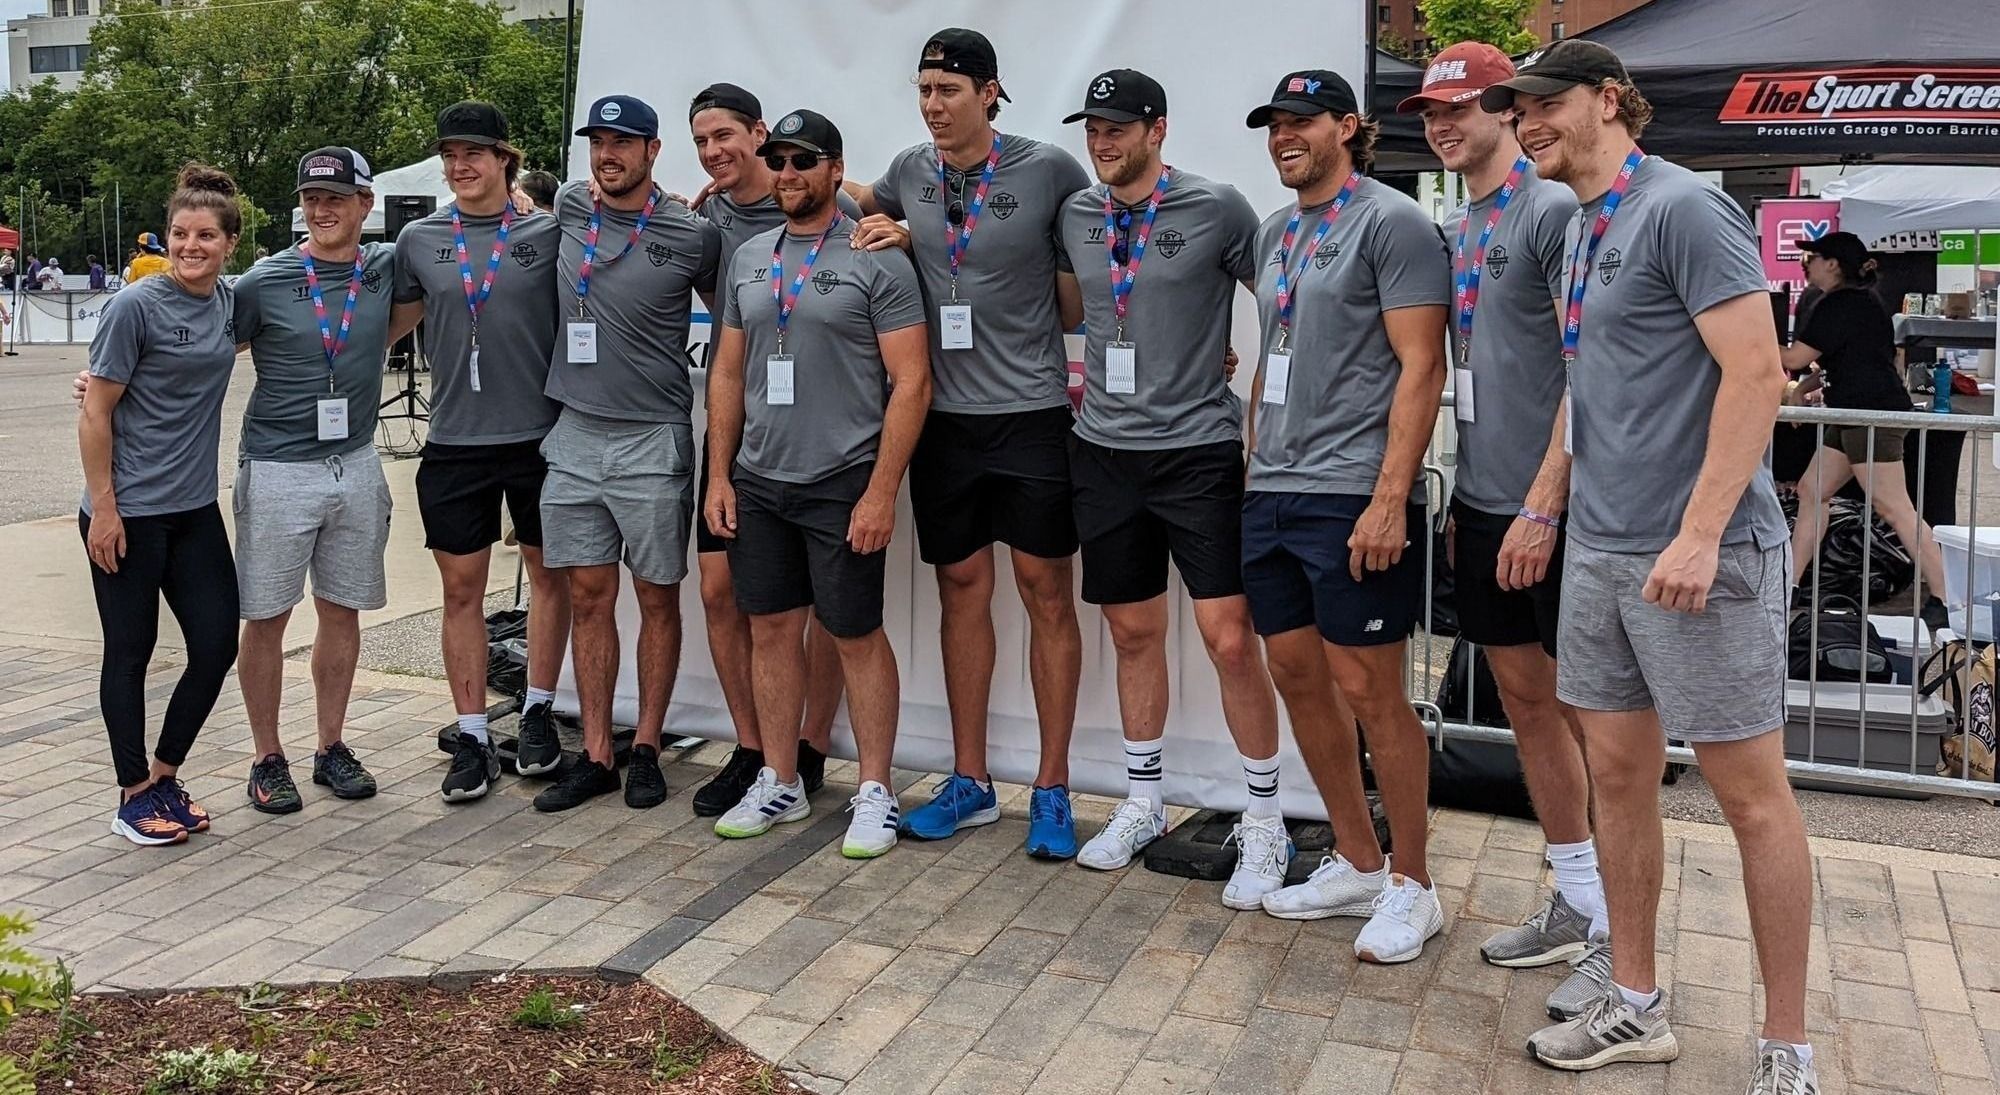 NHL players among those taking part in road hockey fundraiser